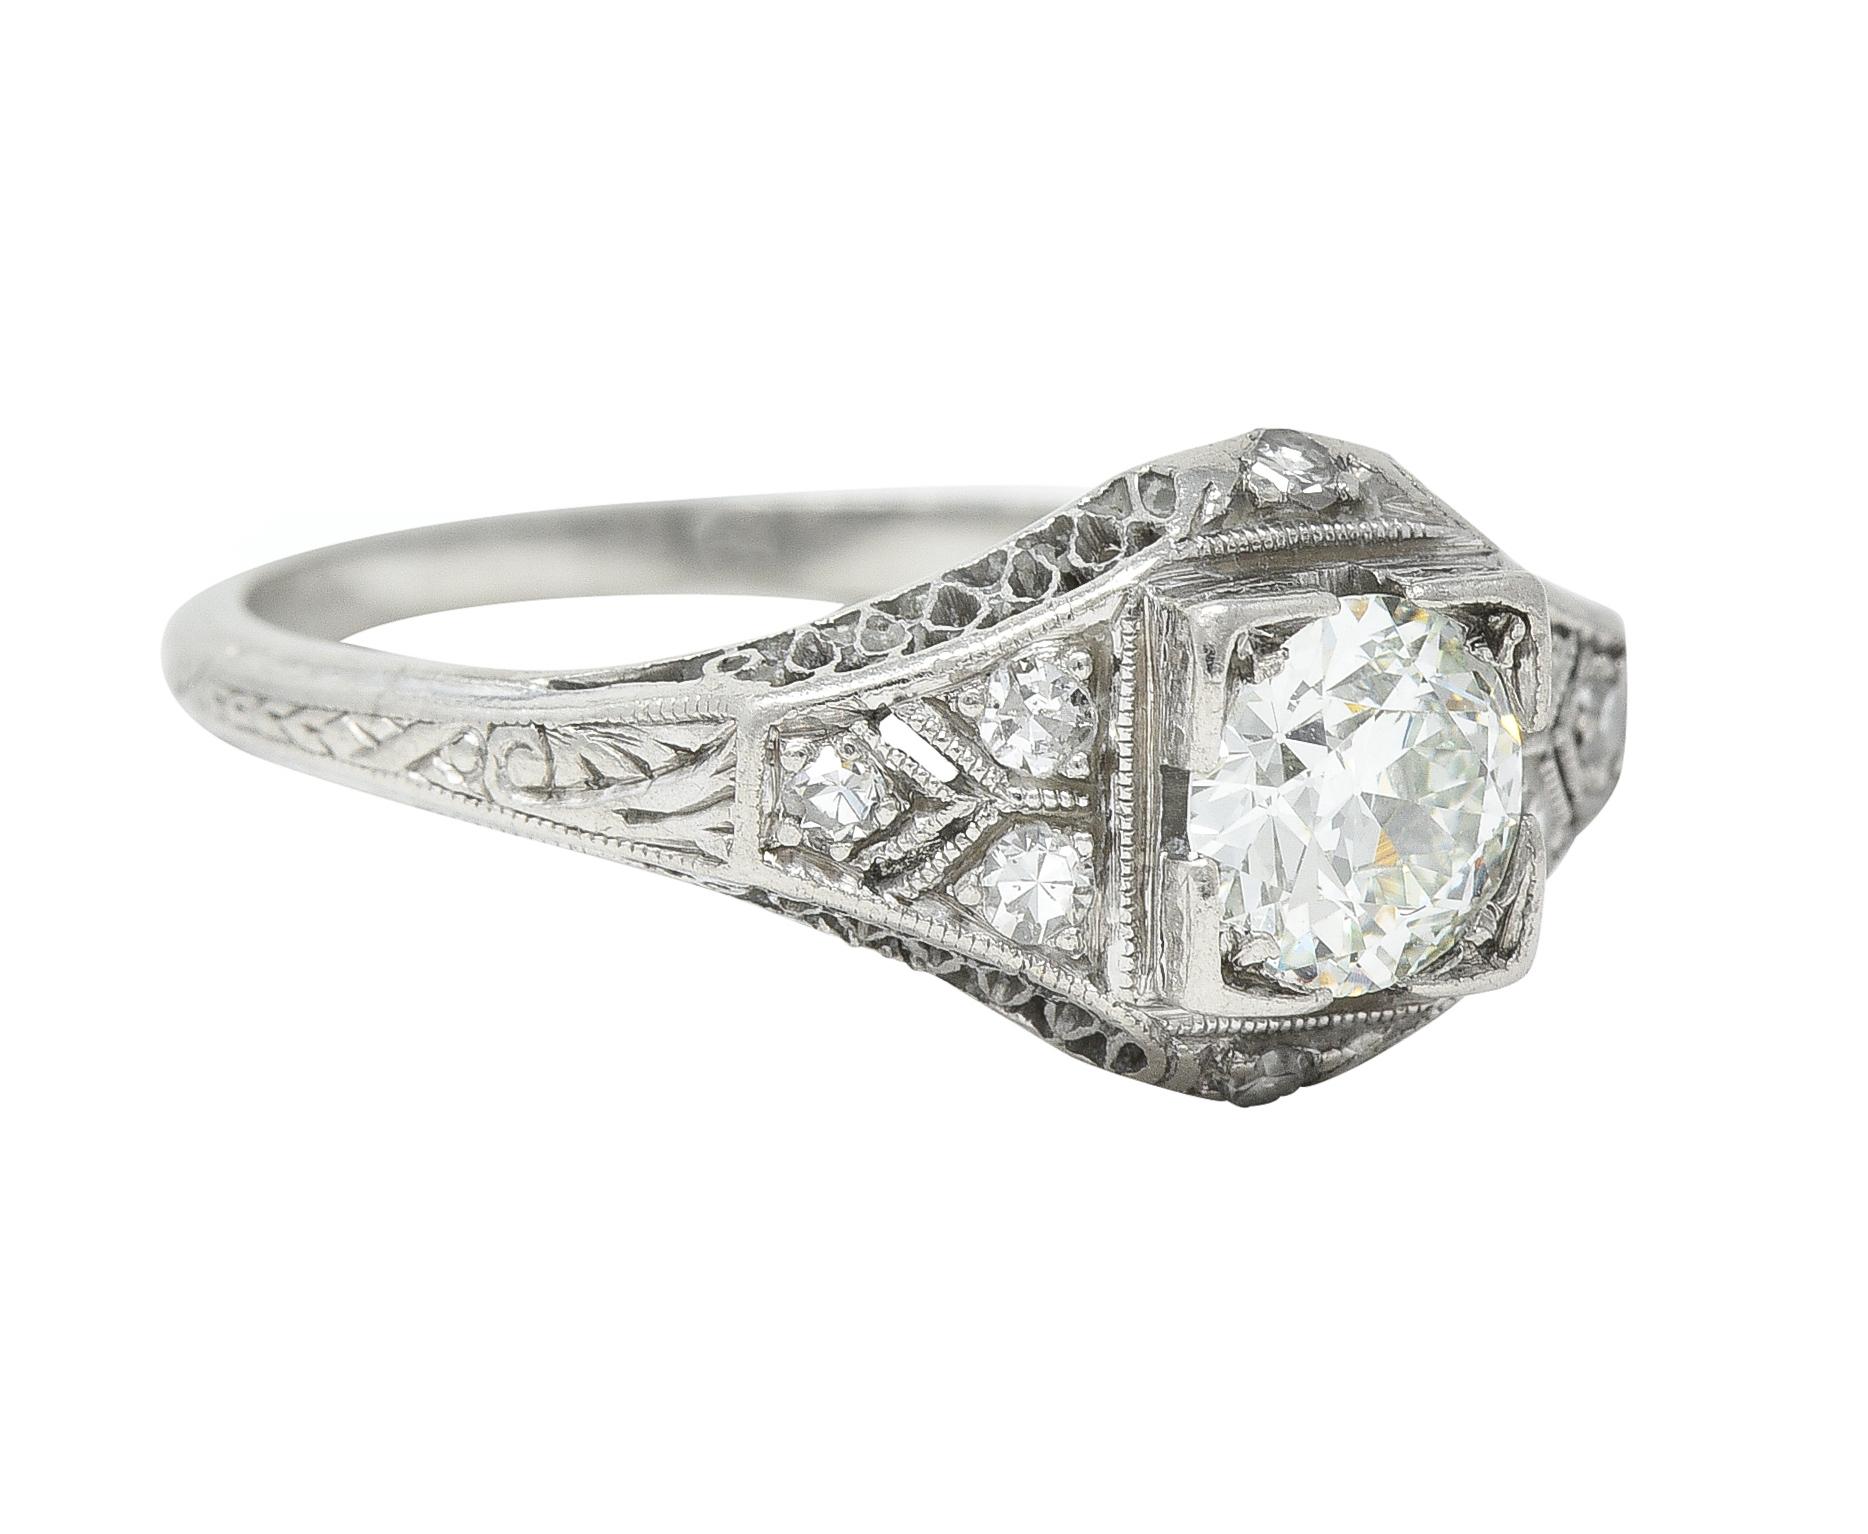 Centering an old European cut diamond weighing approximately 0.55 carat - H color with VS1 clarity
Bead set in a grooved square form head and flanked by pierced geometric shoulders
Accented by a pierced lattice motif profile with bead set single-cut